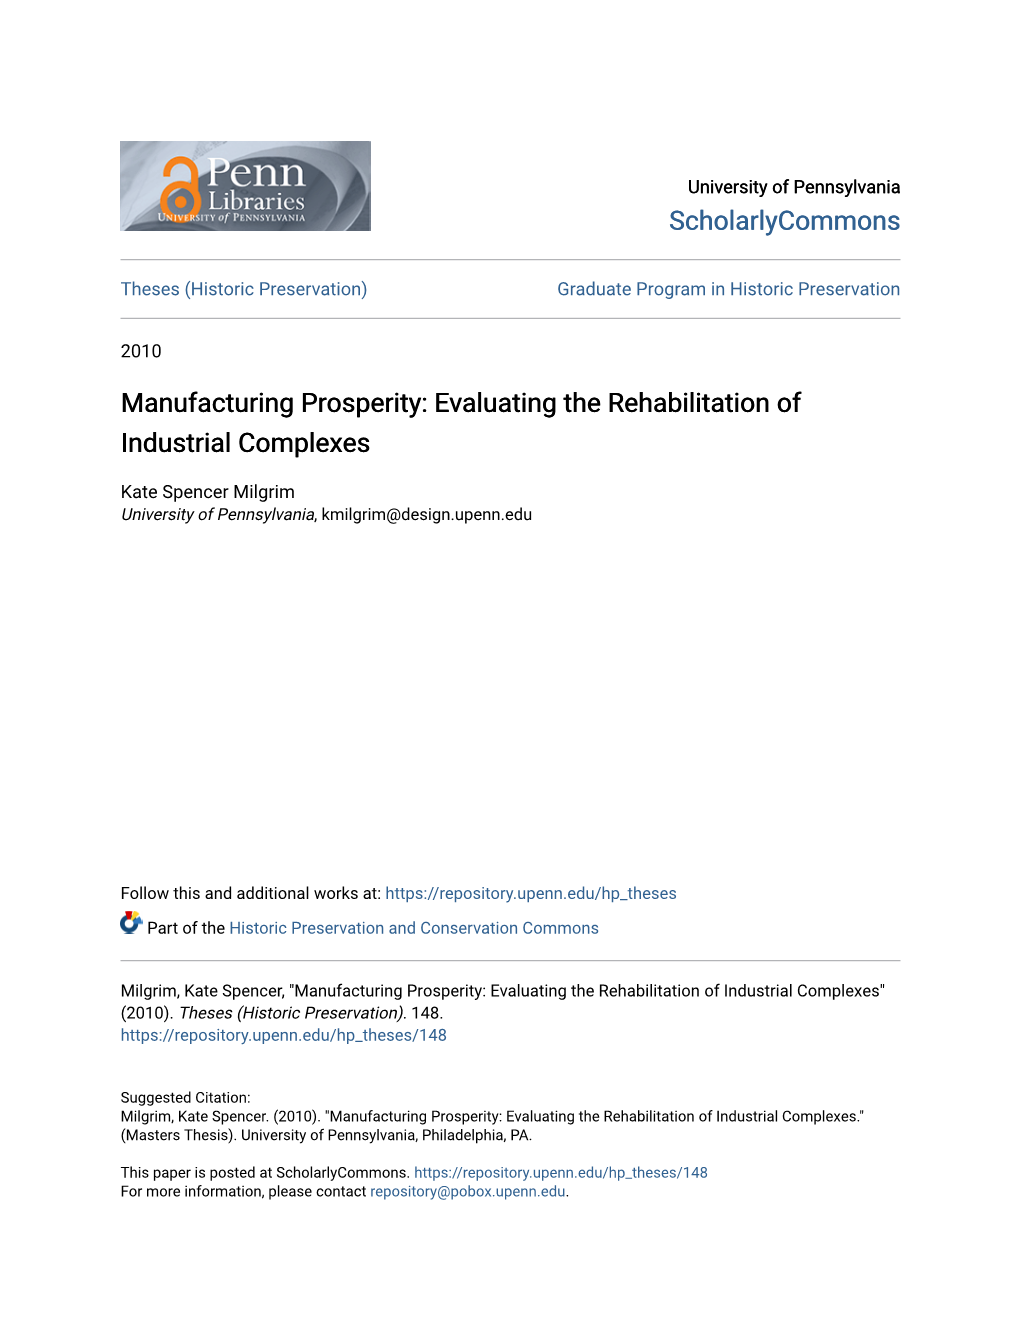 Evaluating the Rehabilitation of Industrial Complexes